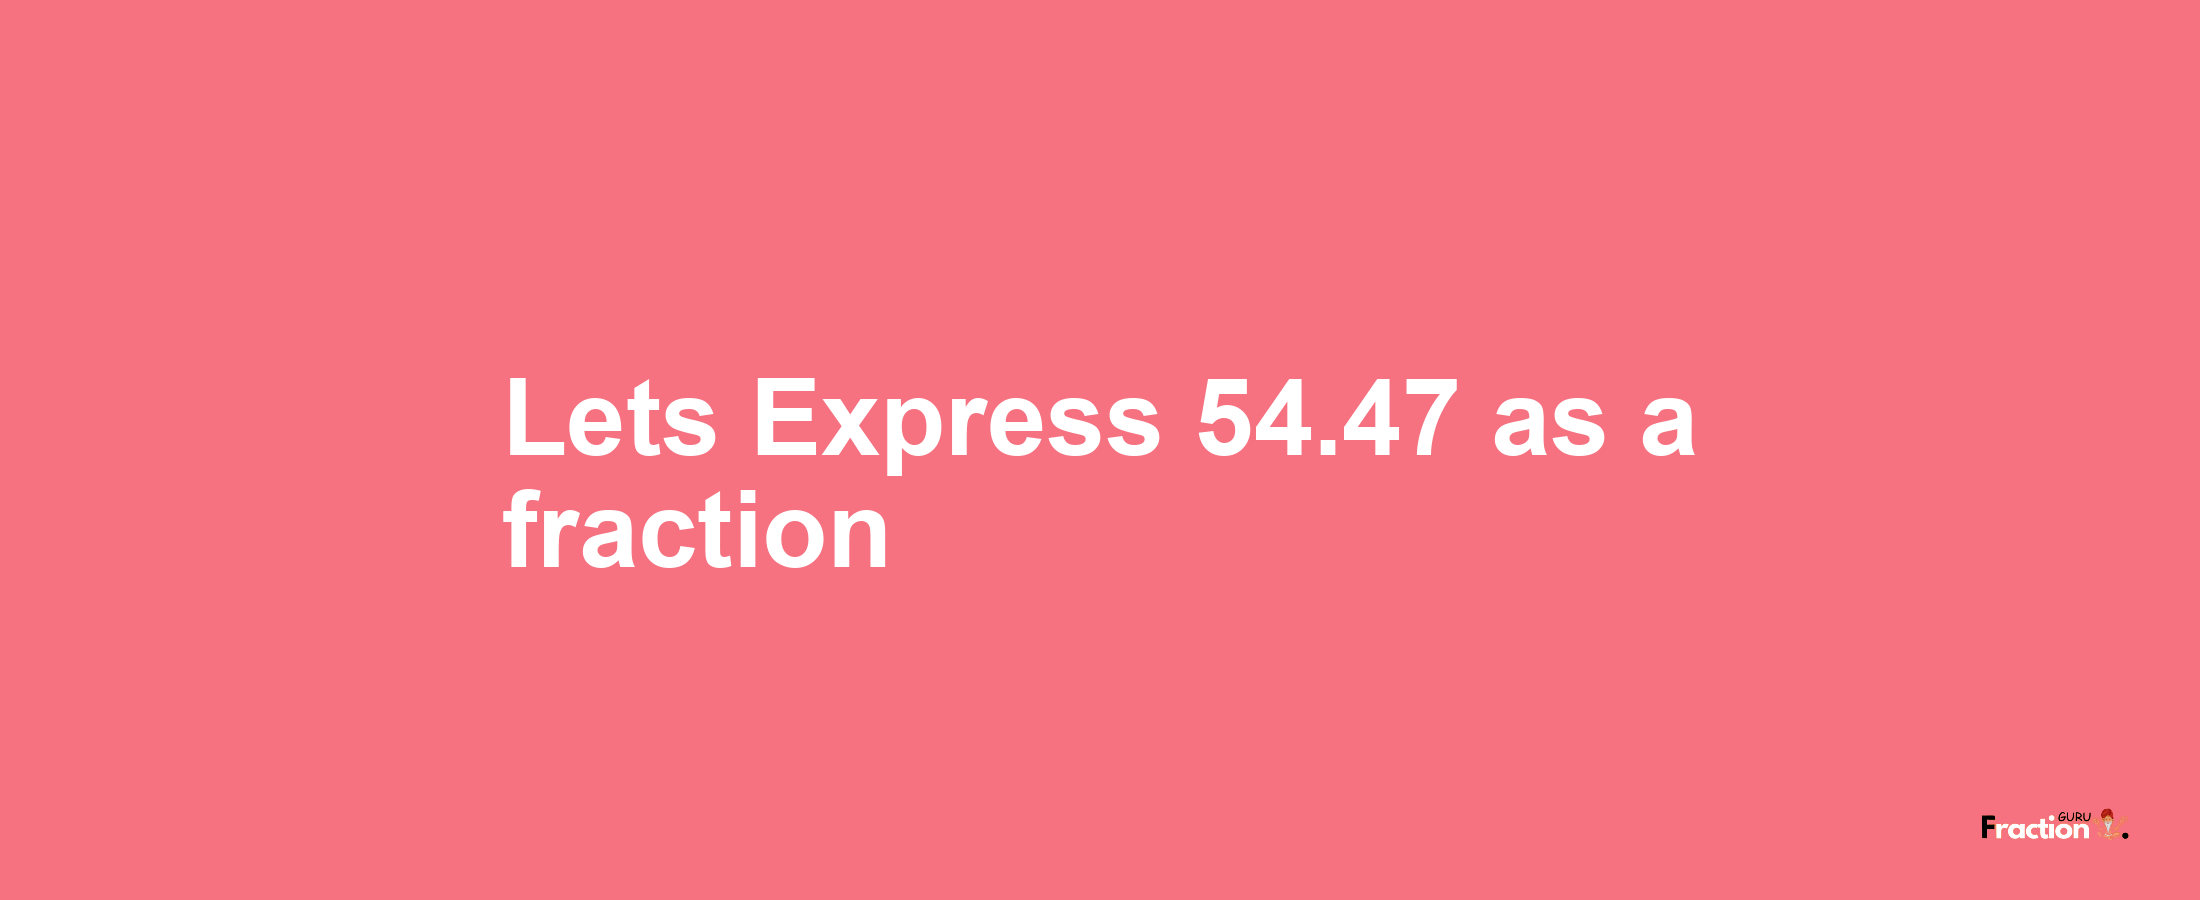 Lets Express 54.47 as afraction